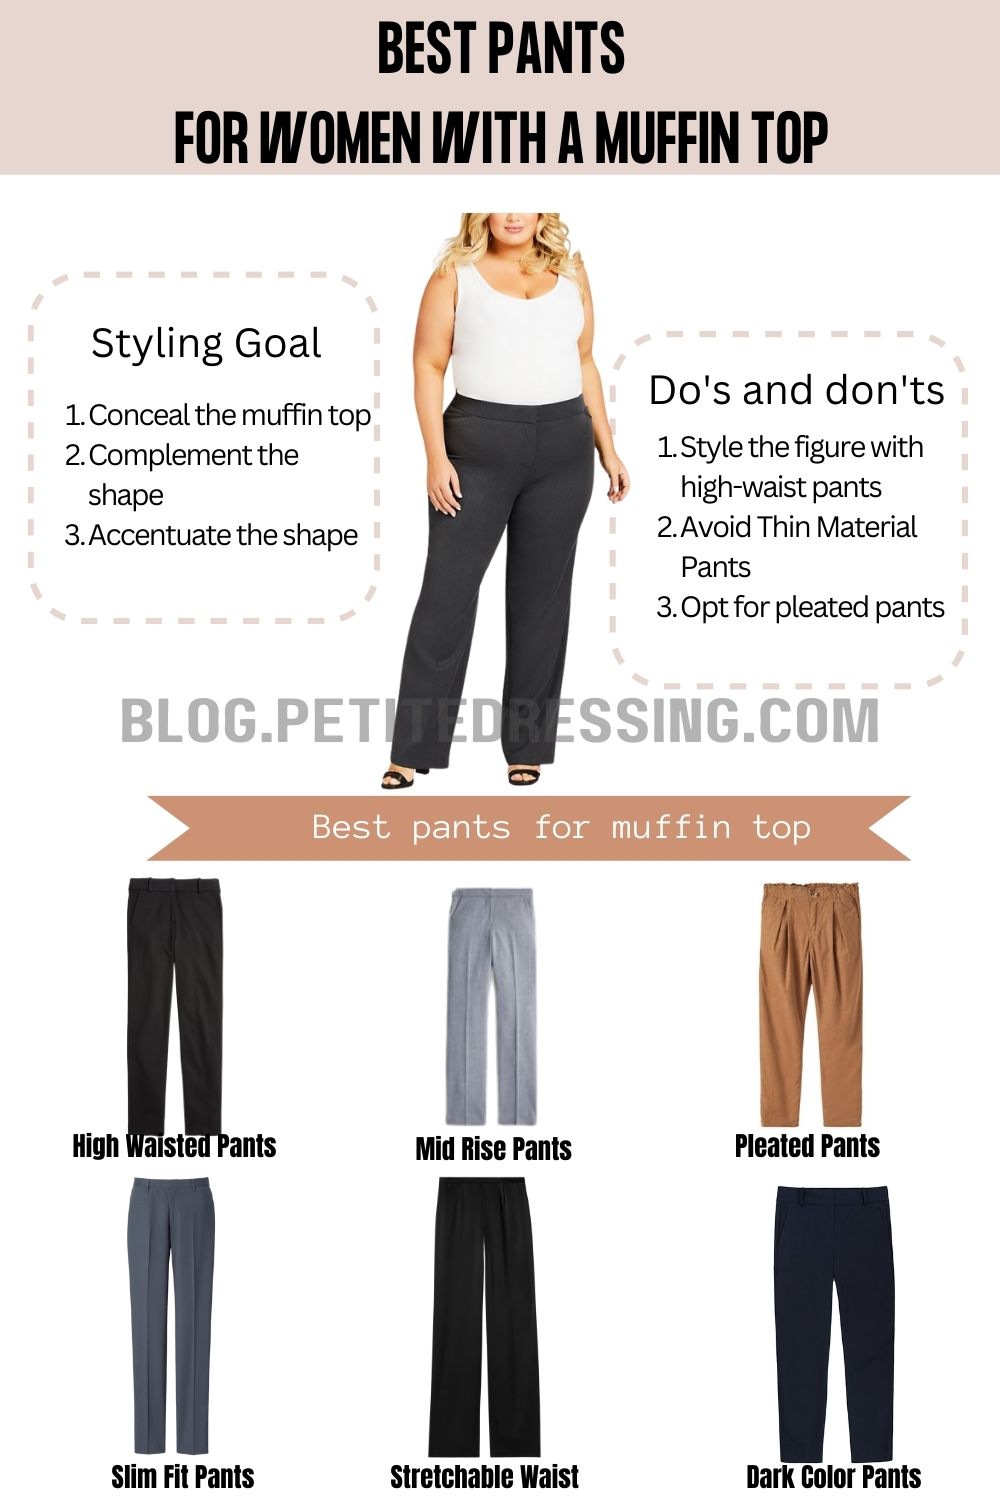 The Ultimate Pants Guide for Women with a Muffin Top - Petite Dressing